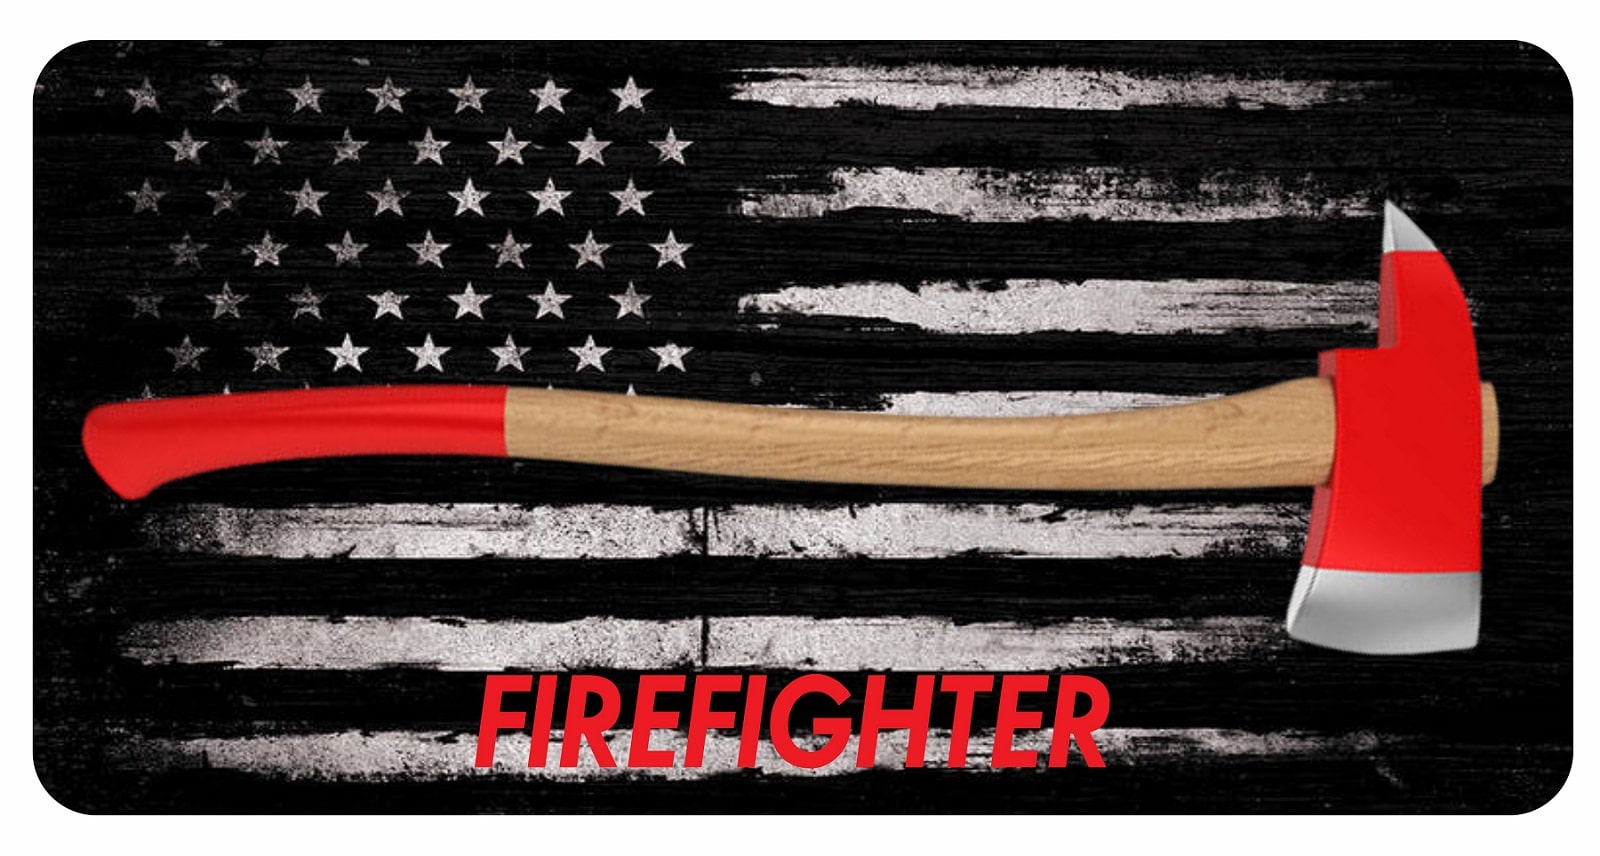 Firefighter Axe With Text On U.S.A. Flag Photo LICENSE PLATE